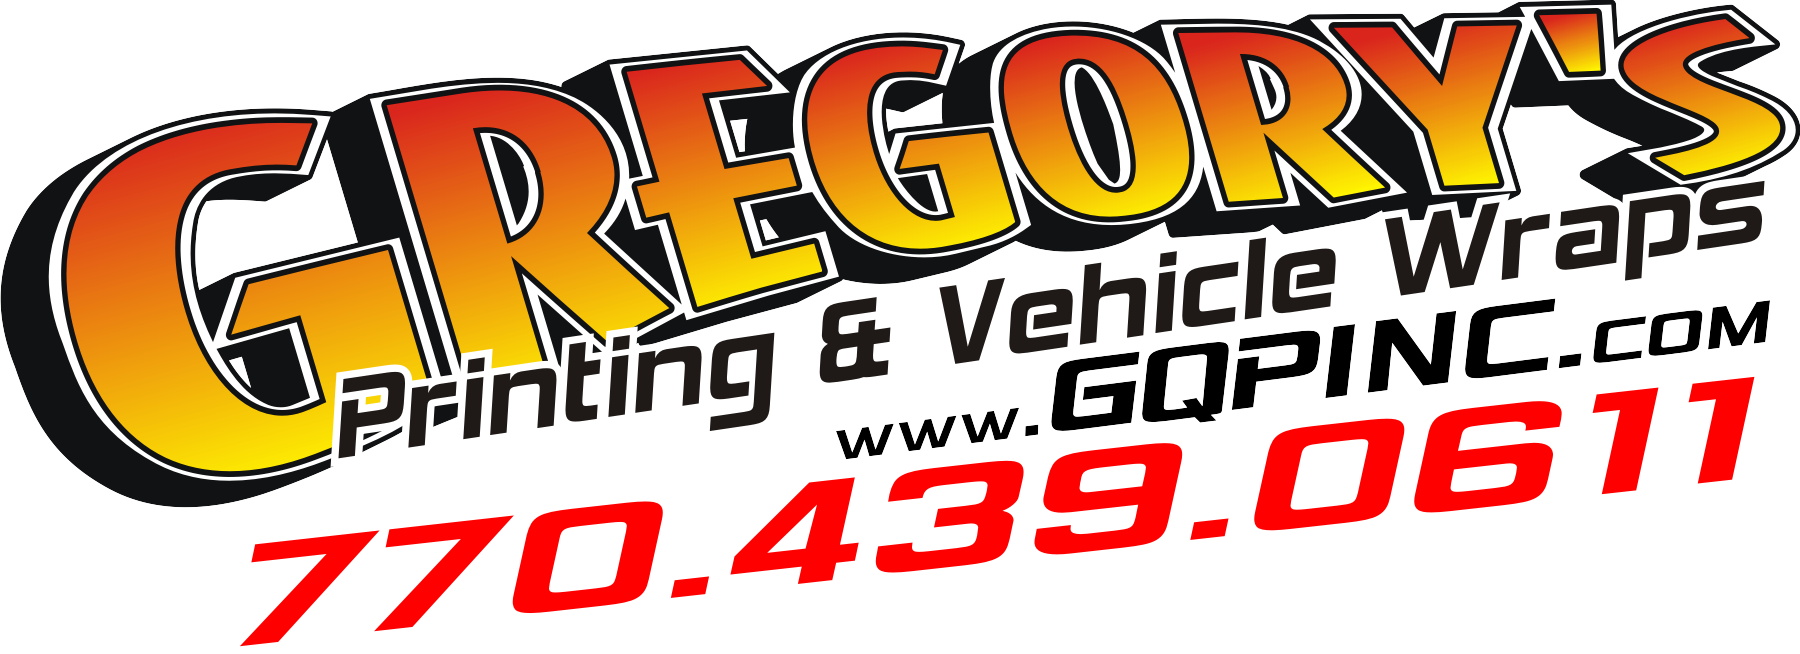 Gregory's Quality Printing & Vehicle